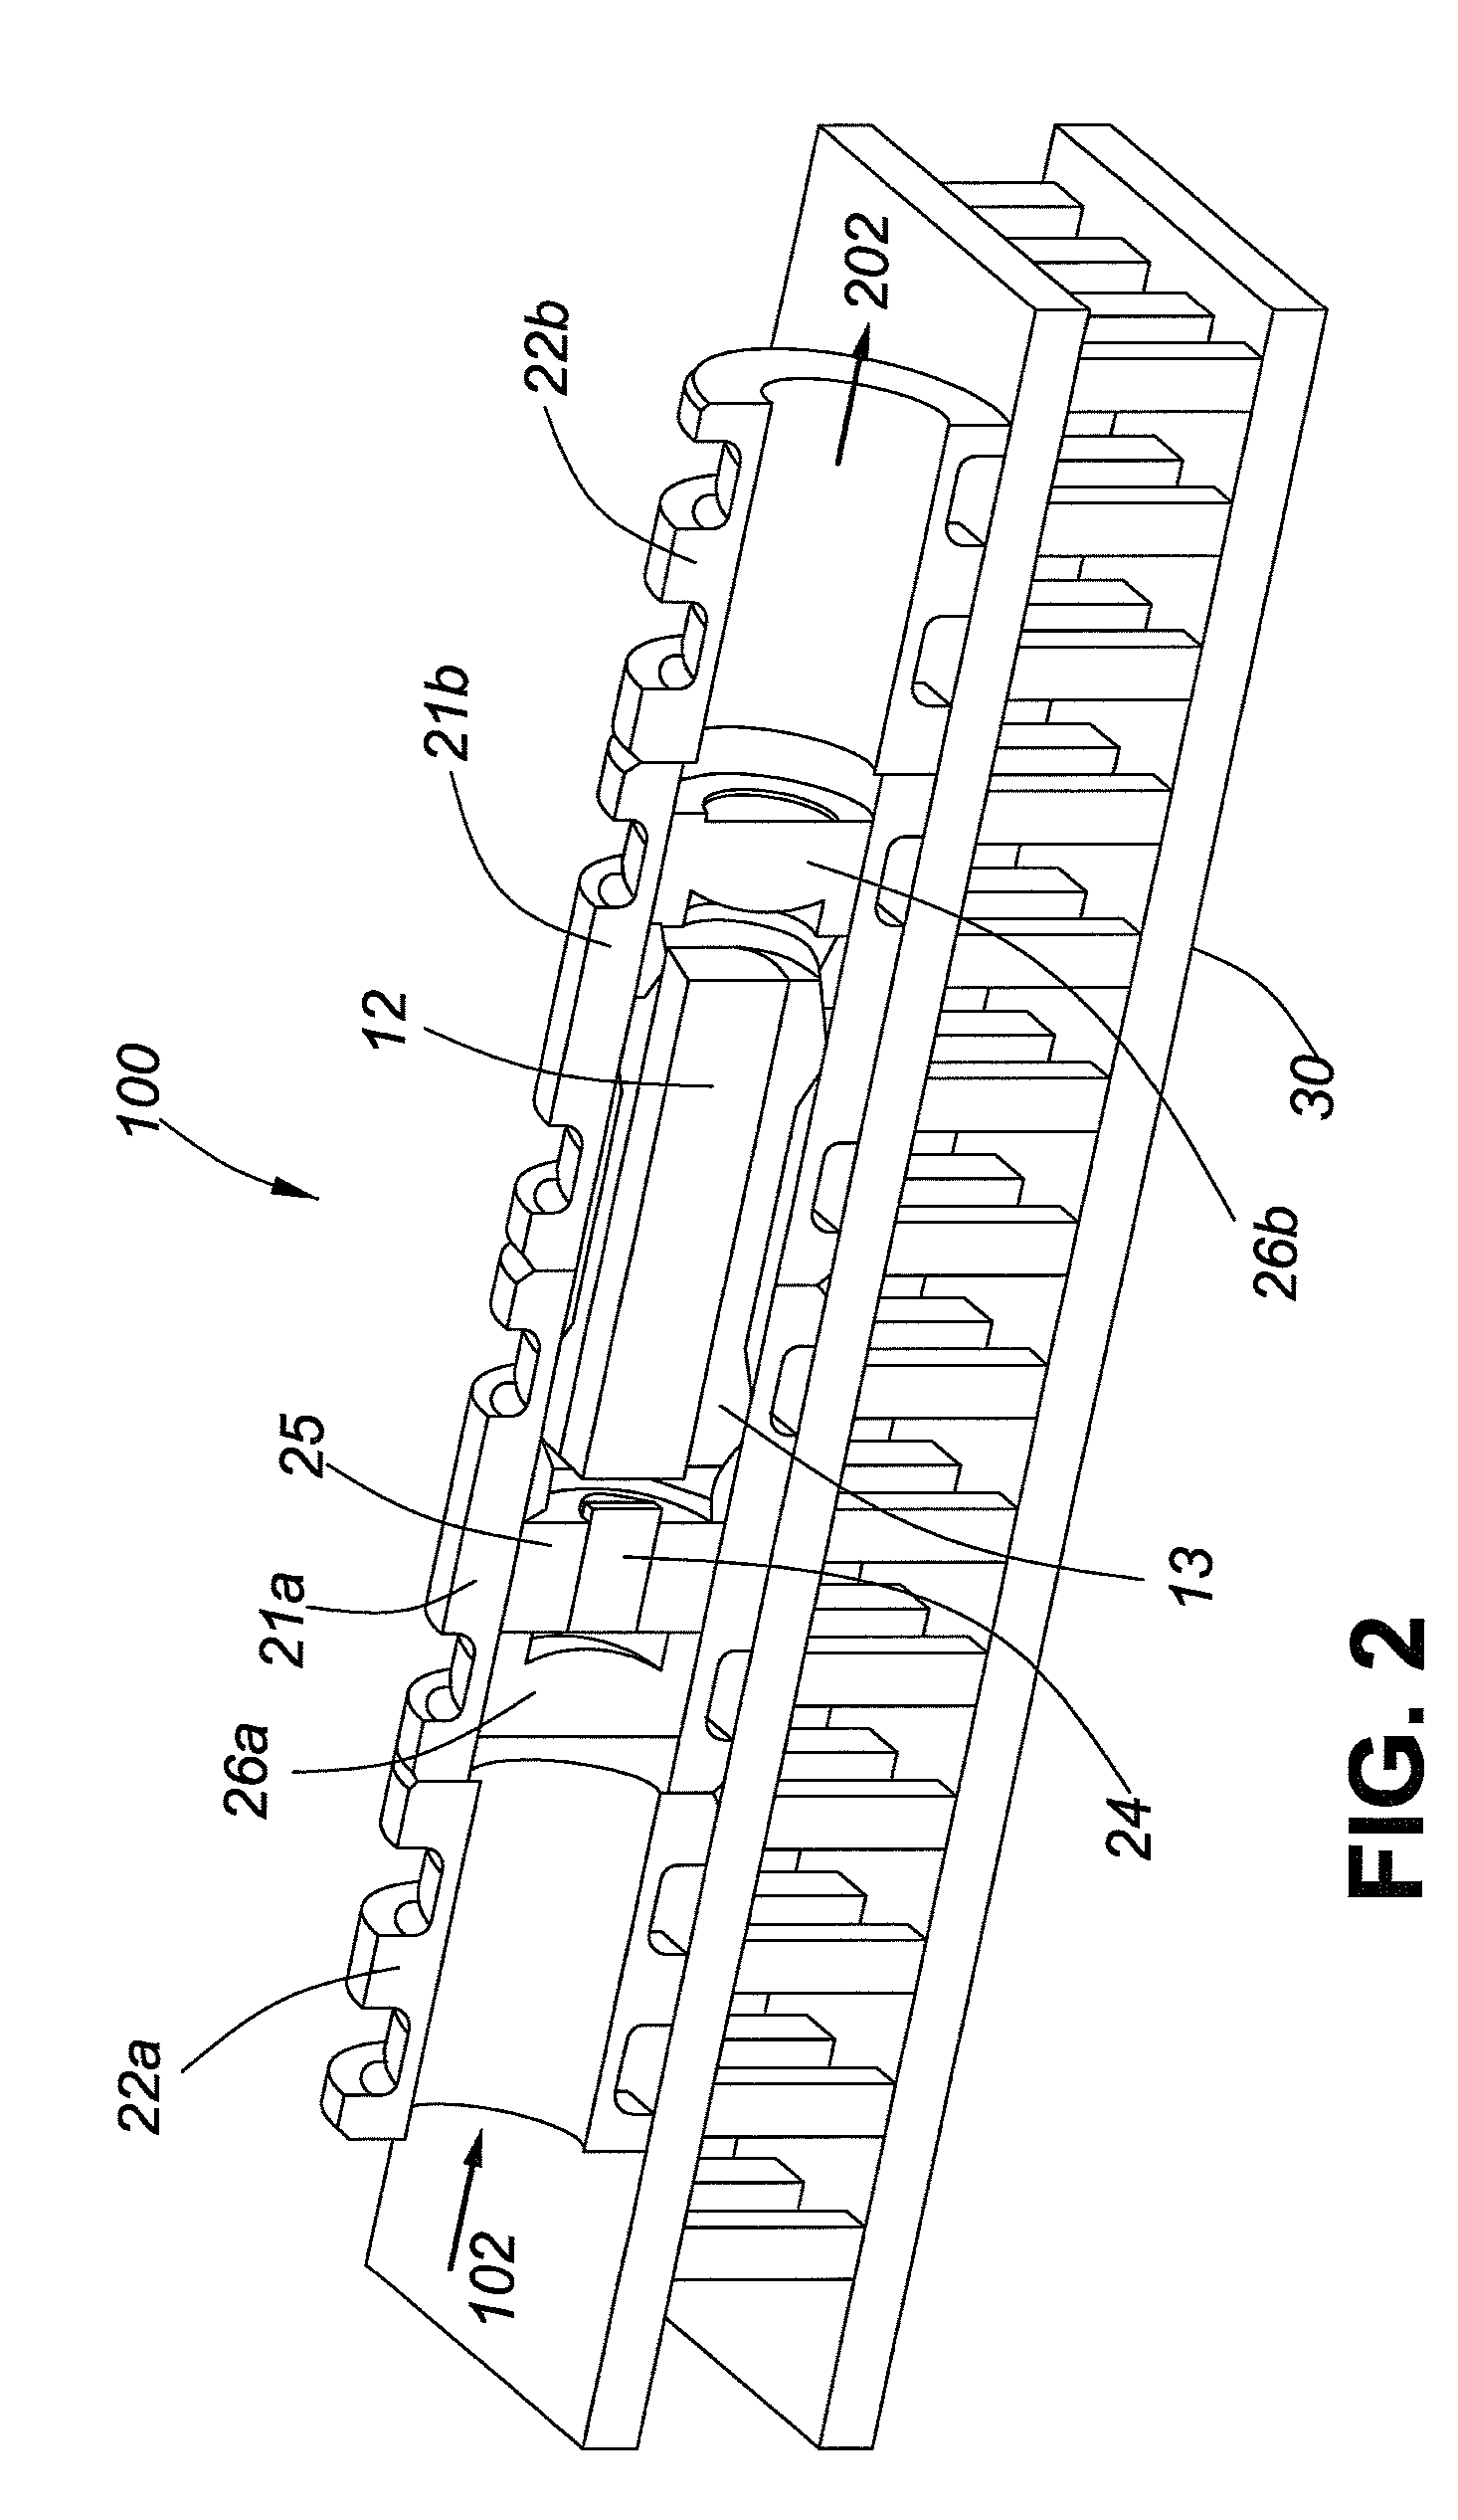 Modular solid-state laser platform based on coaxial package and corresponding assembly process